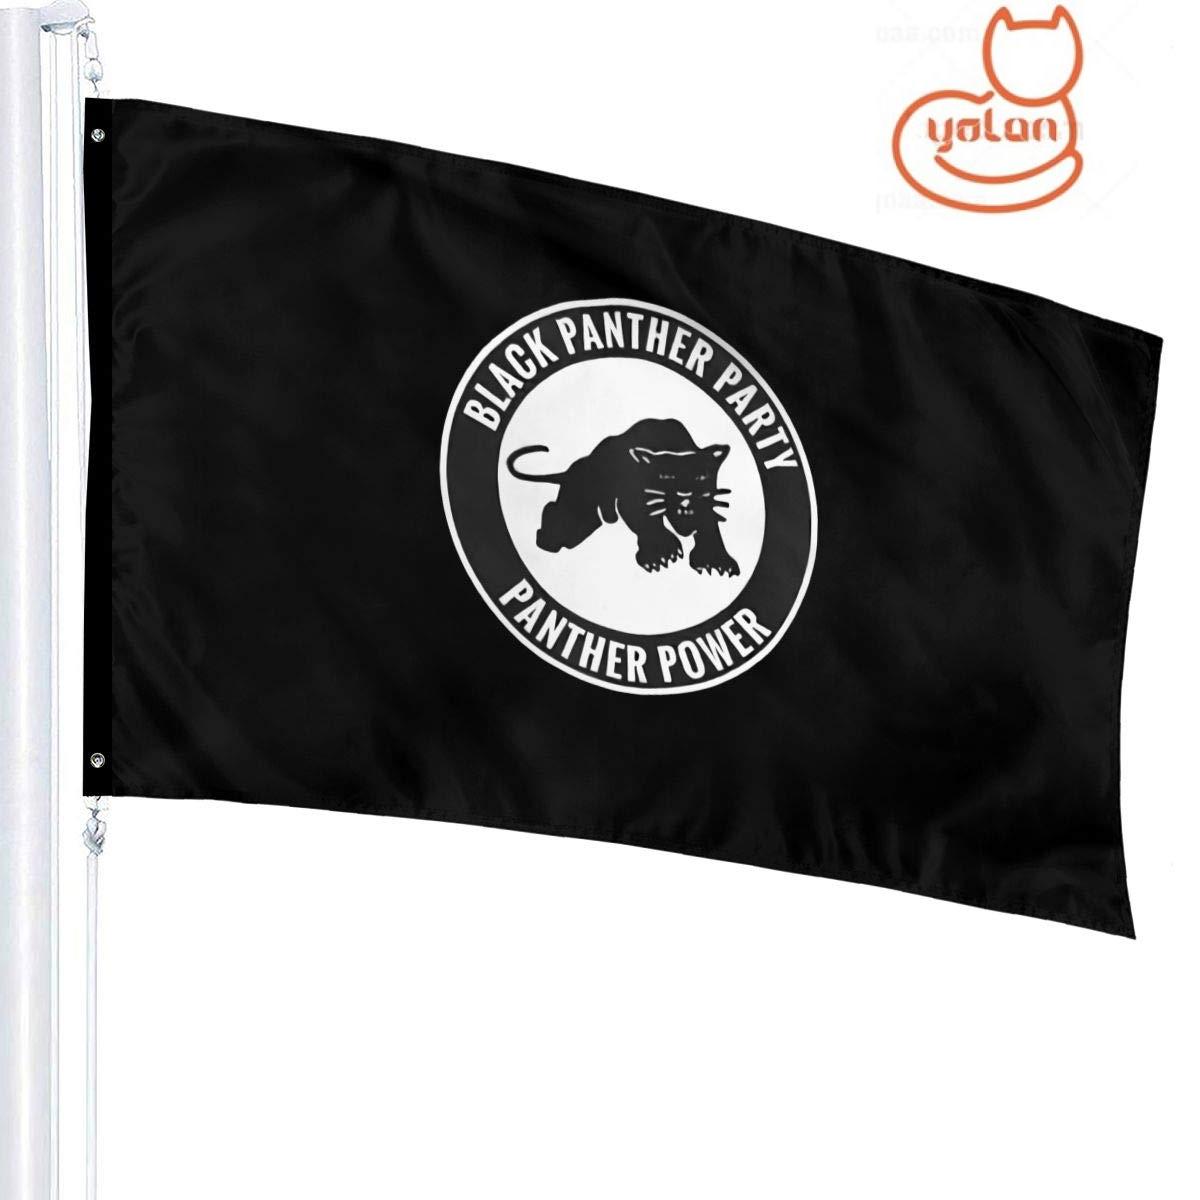 ☆YOLA☆ Premium Quality Black Panther Party Decor 6 X 3.5 Inch Flag Easy to Install Fade Resistant Heavy Duty Indoor and Outdoor Poly Nylon